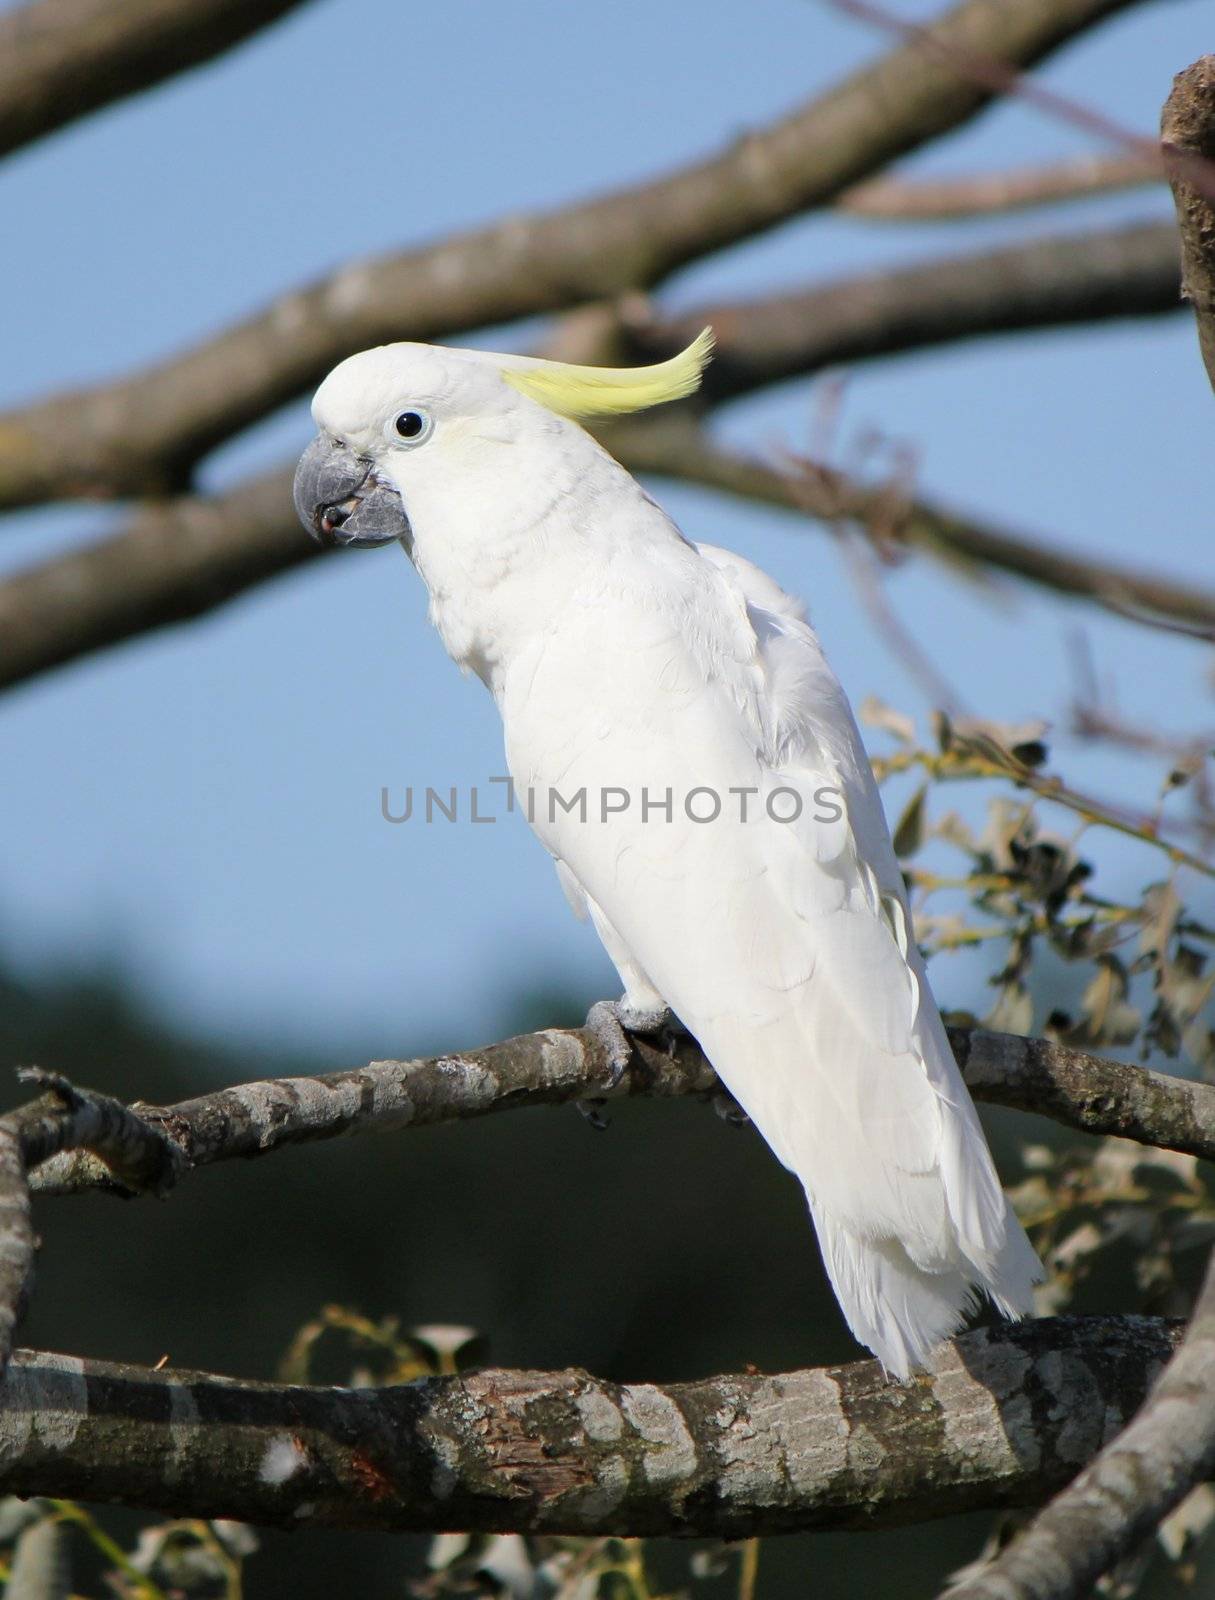 Lesser sulphur crested cockatoo standing on the branch of a tree by beautiful weather